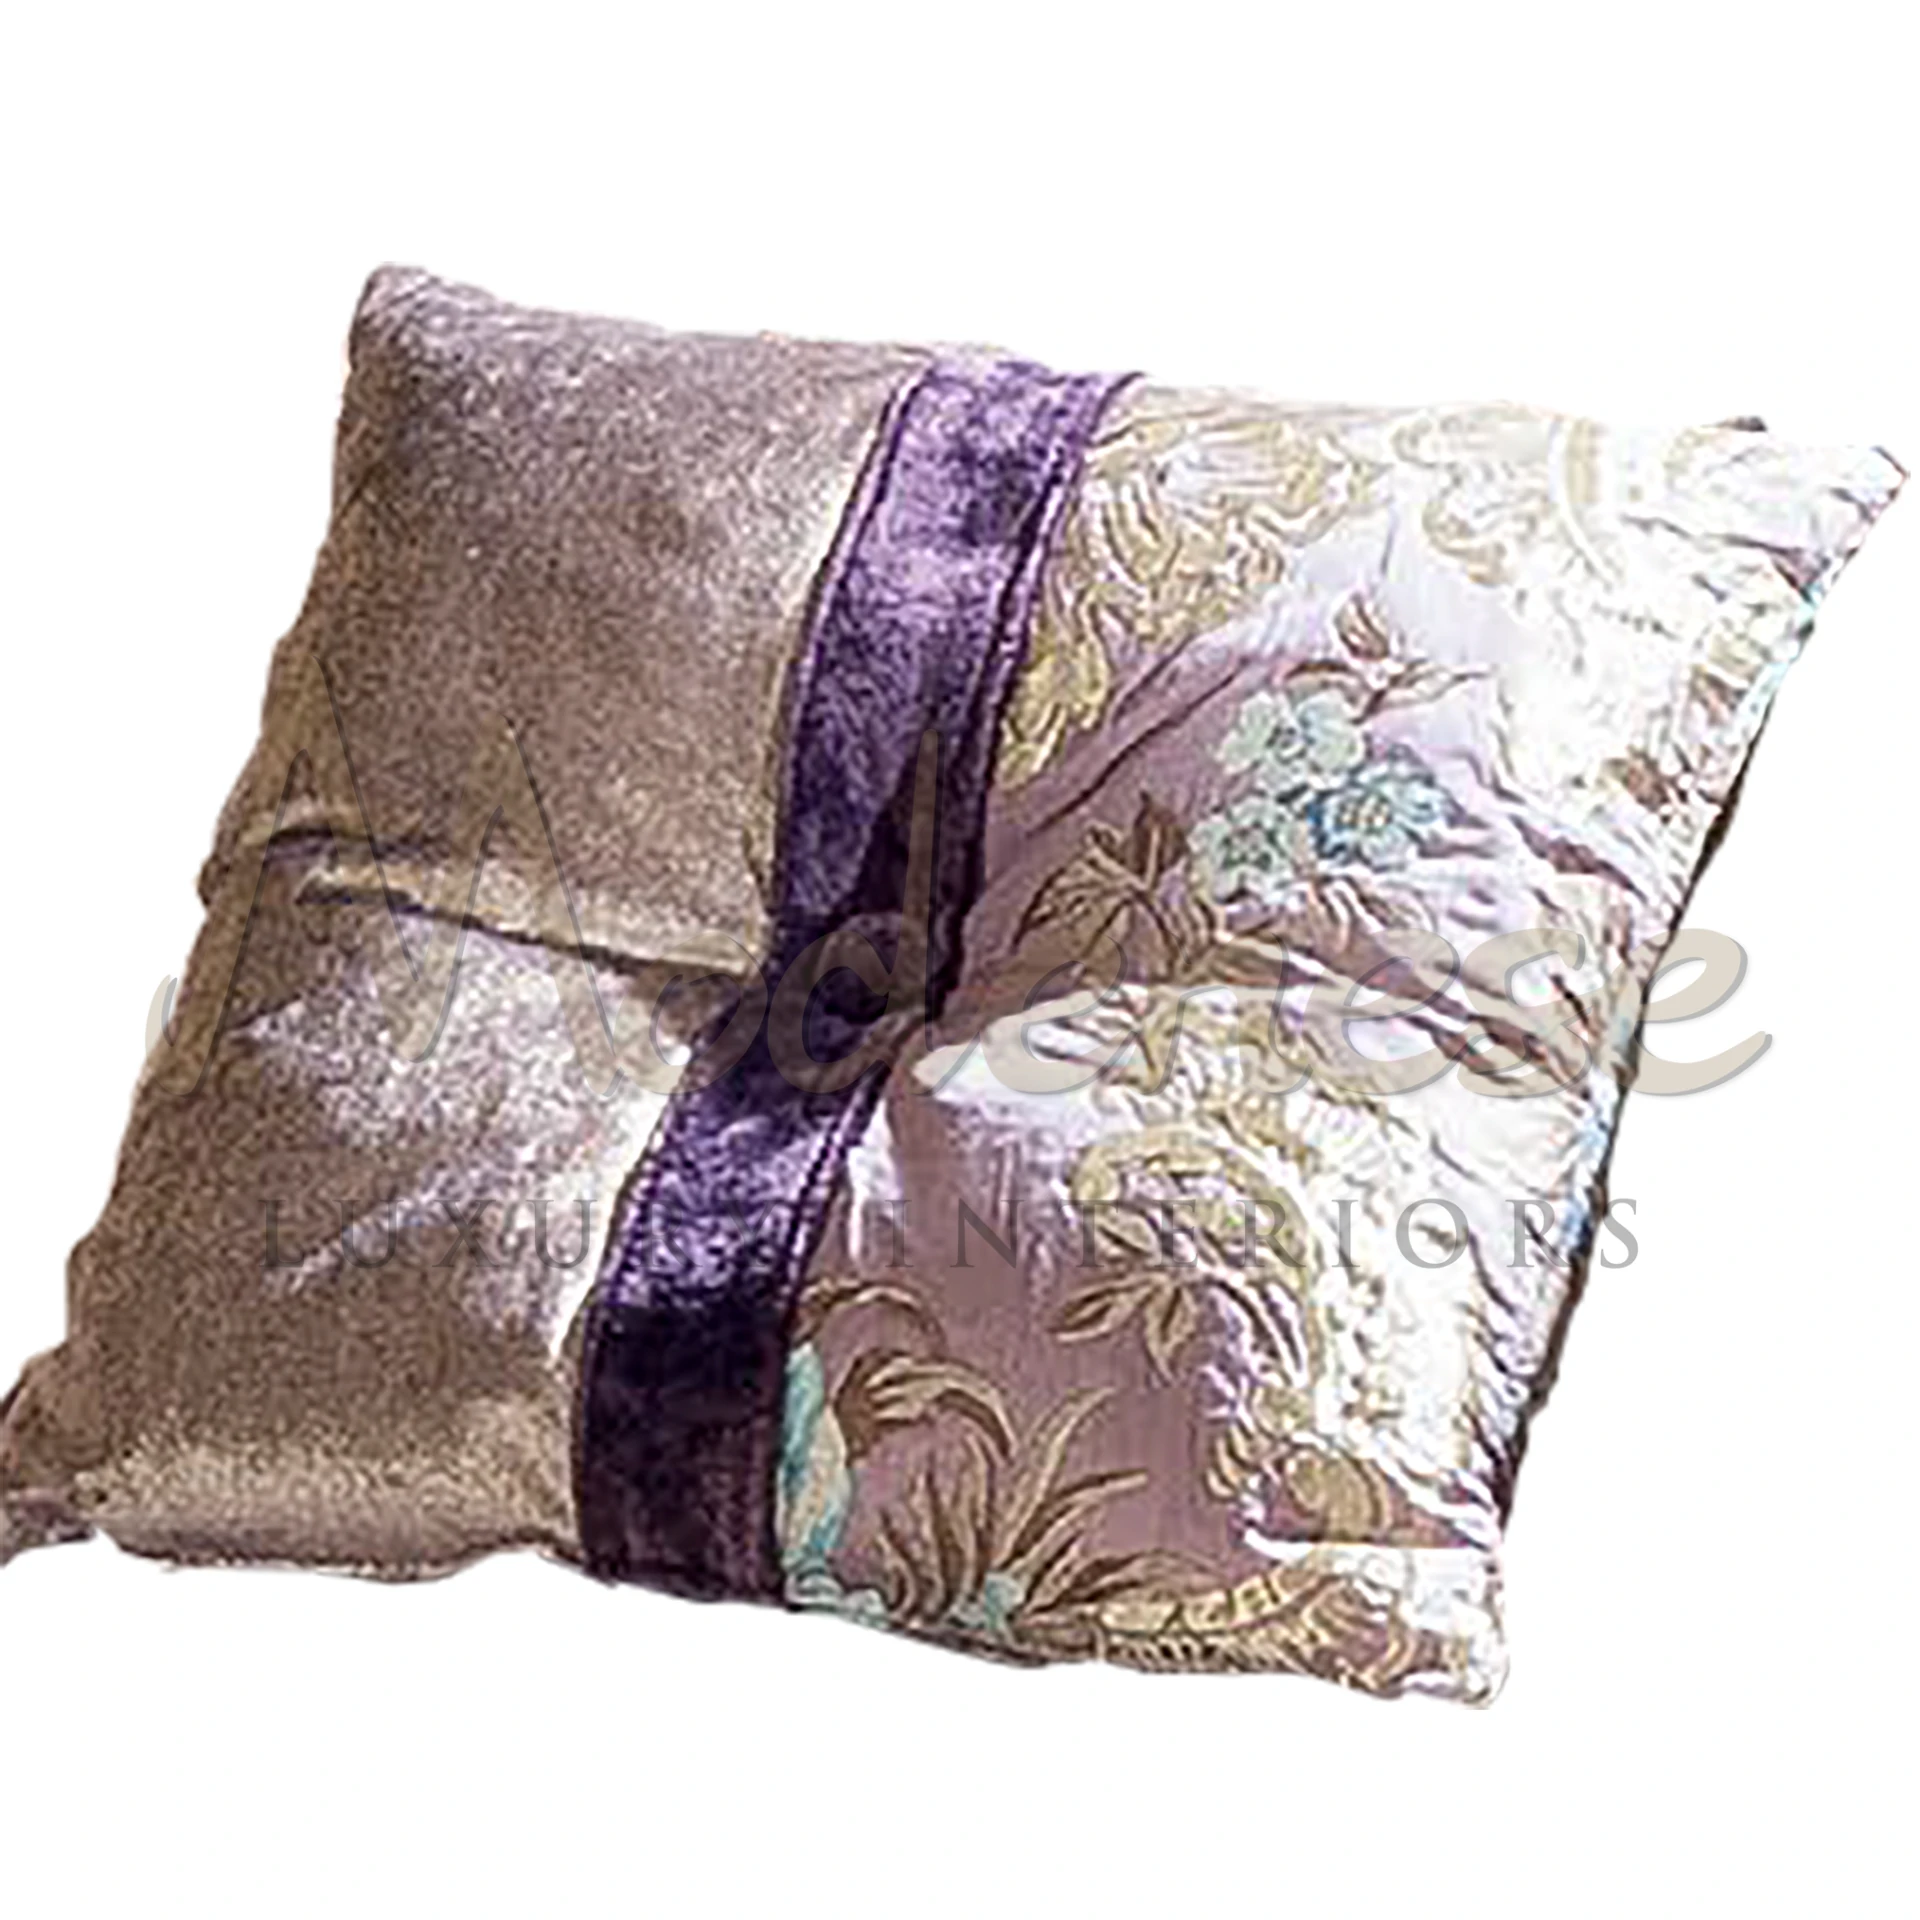 Elegant Flower Pillow with delicate embroidery, capturing the essence of nature's beauty in luxurious textiles.